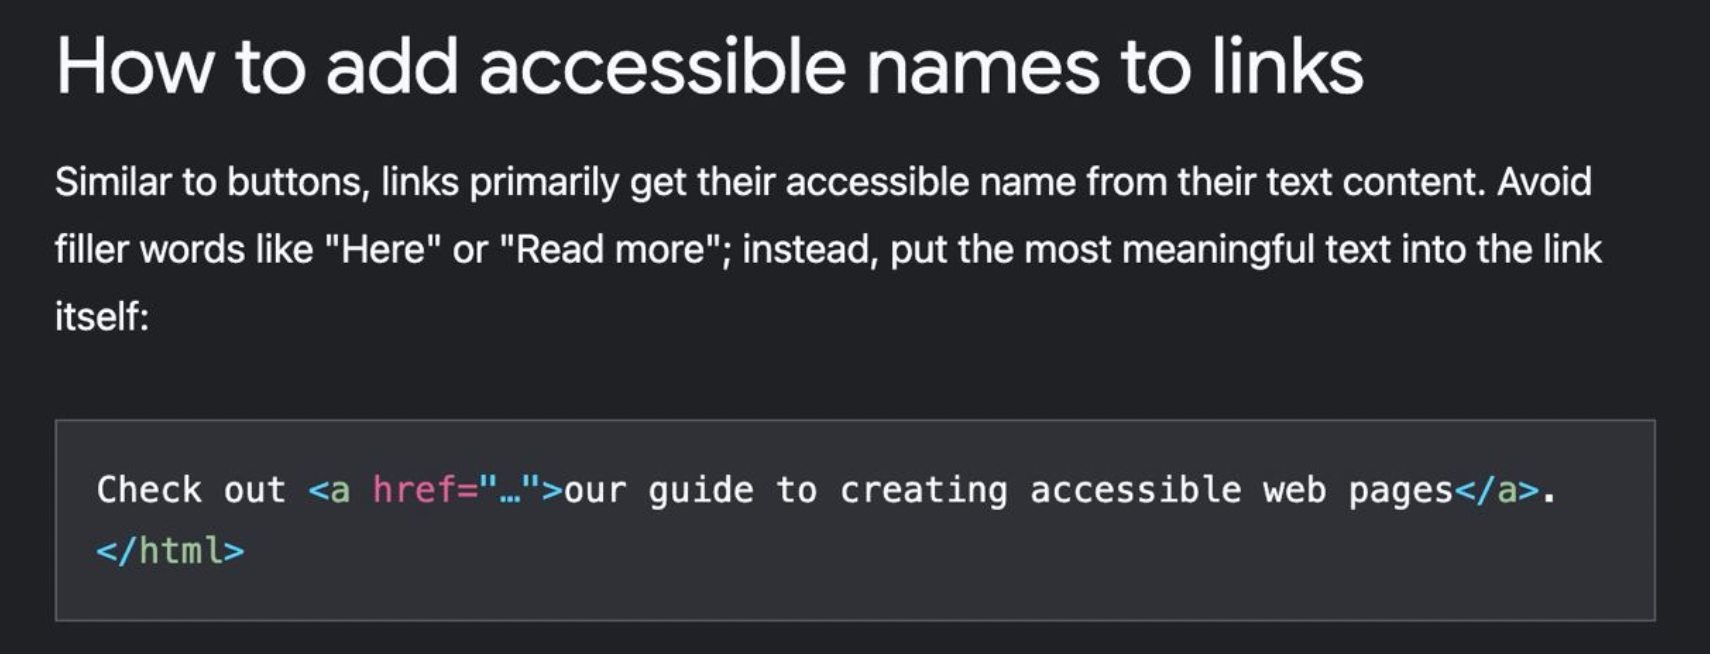 How to add accessible names to links